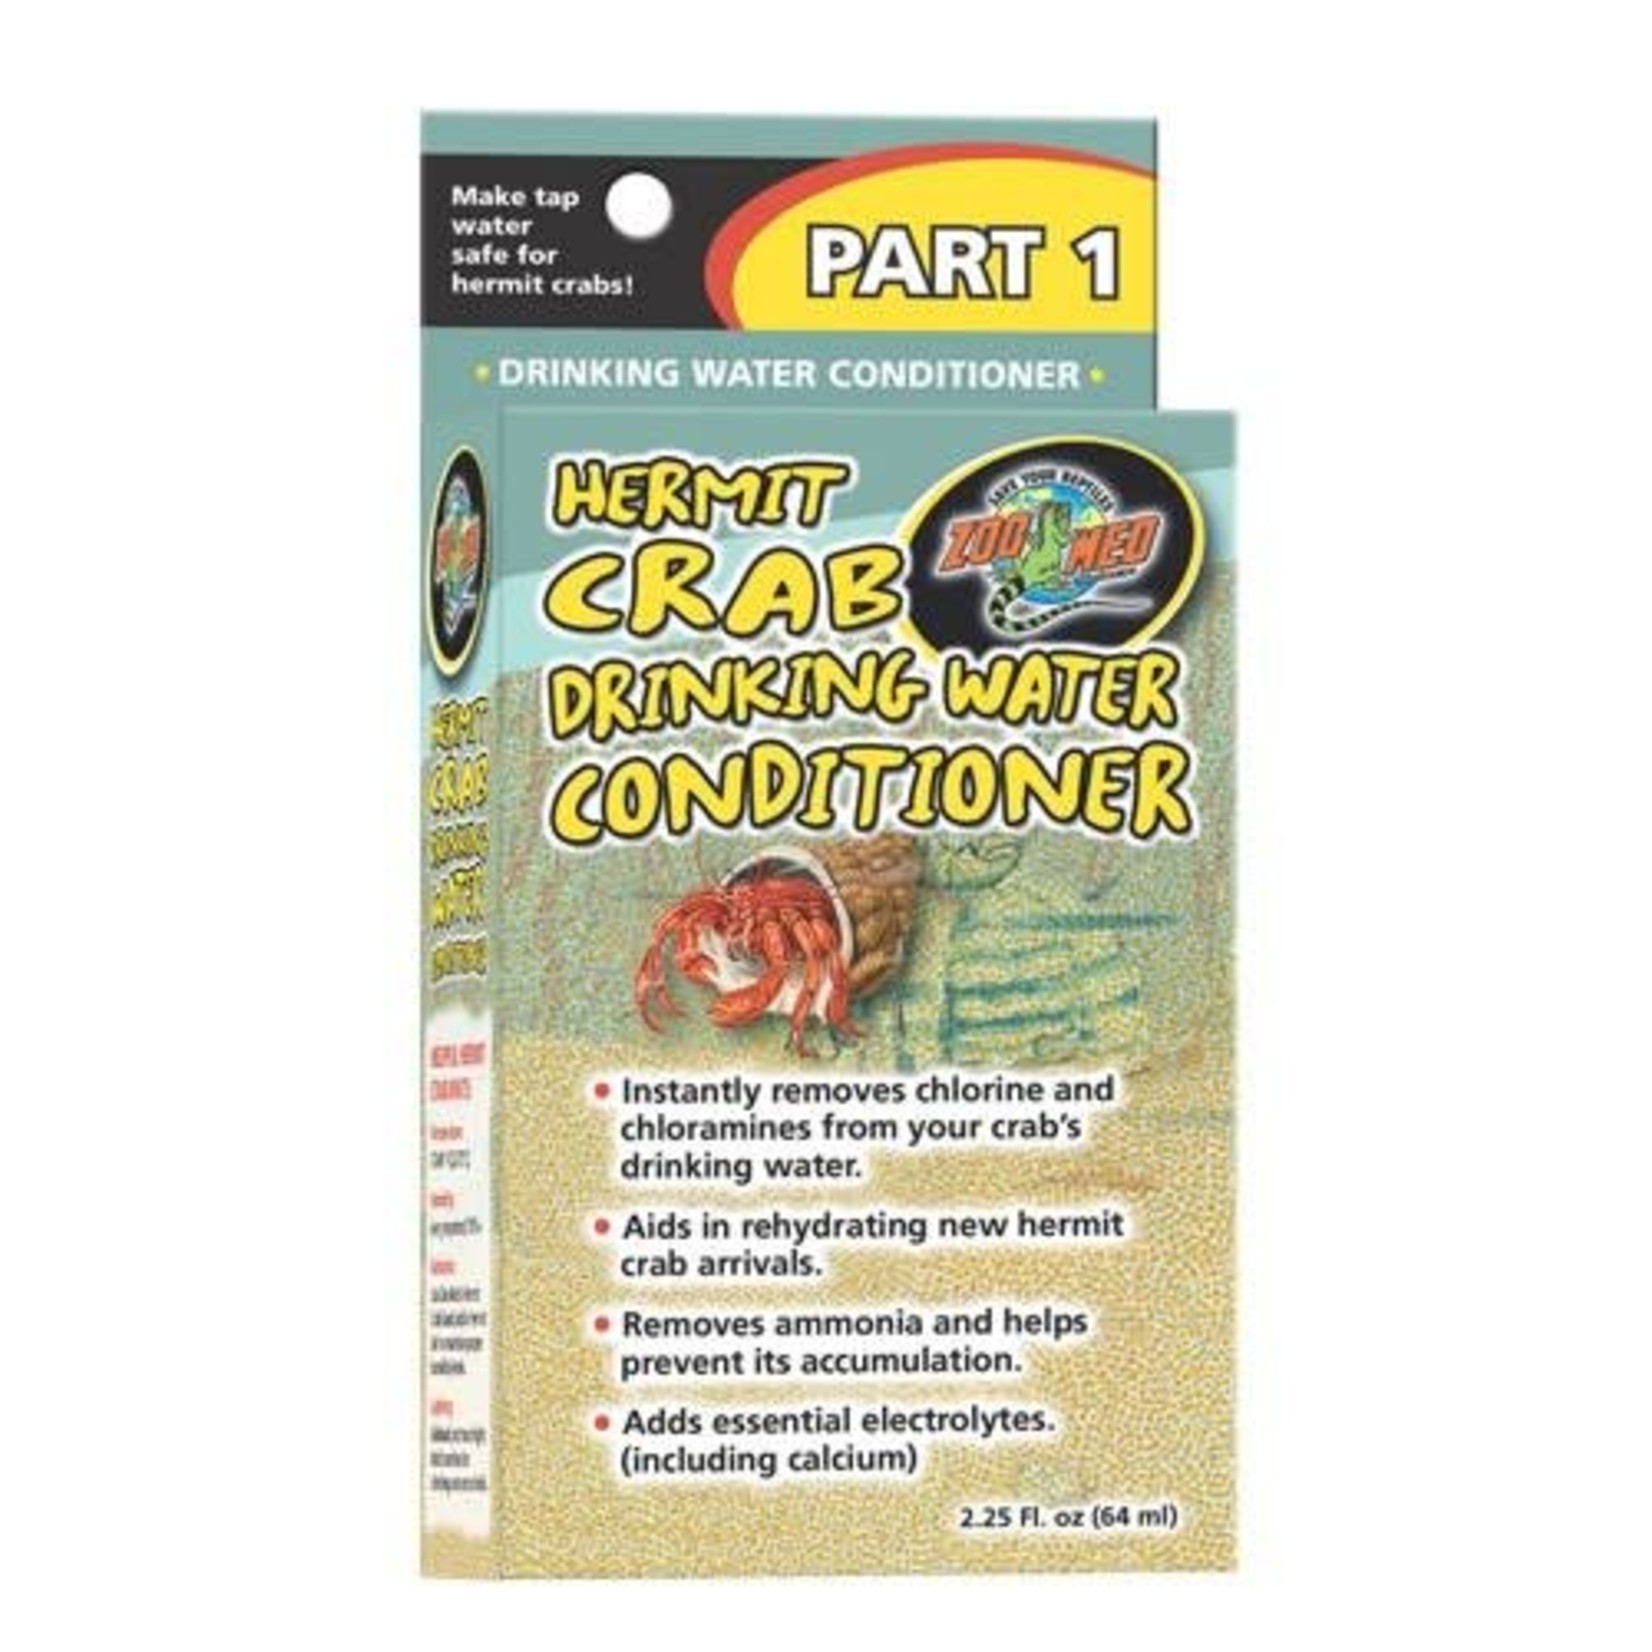 H.Crab Drink.Water Cond. 64ml